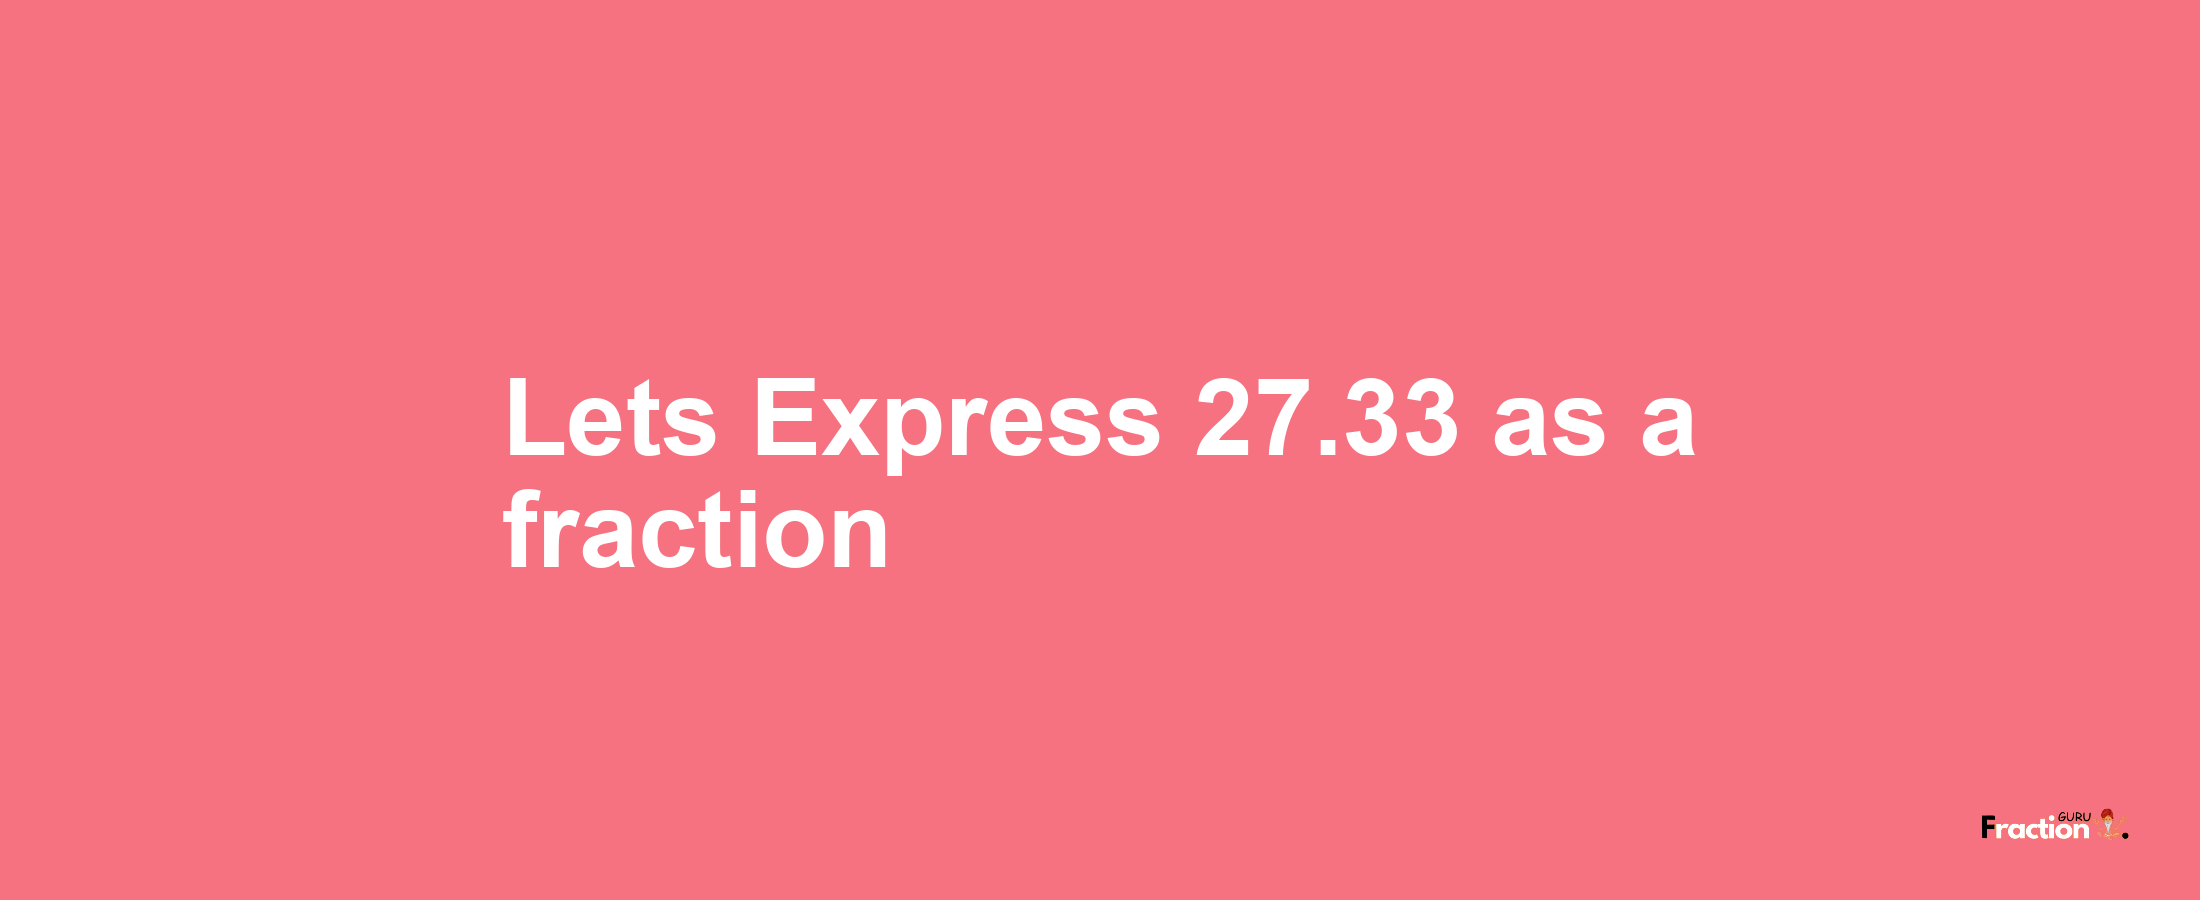 Lets Express 27.33 as afraction